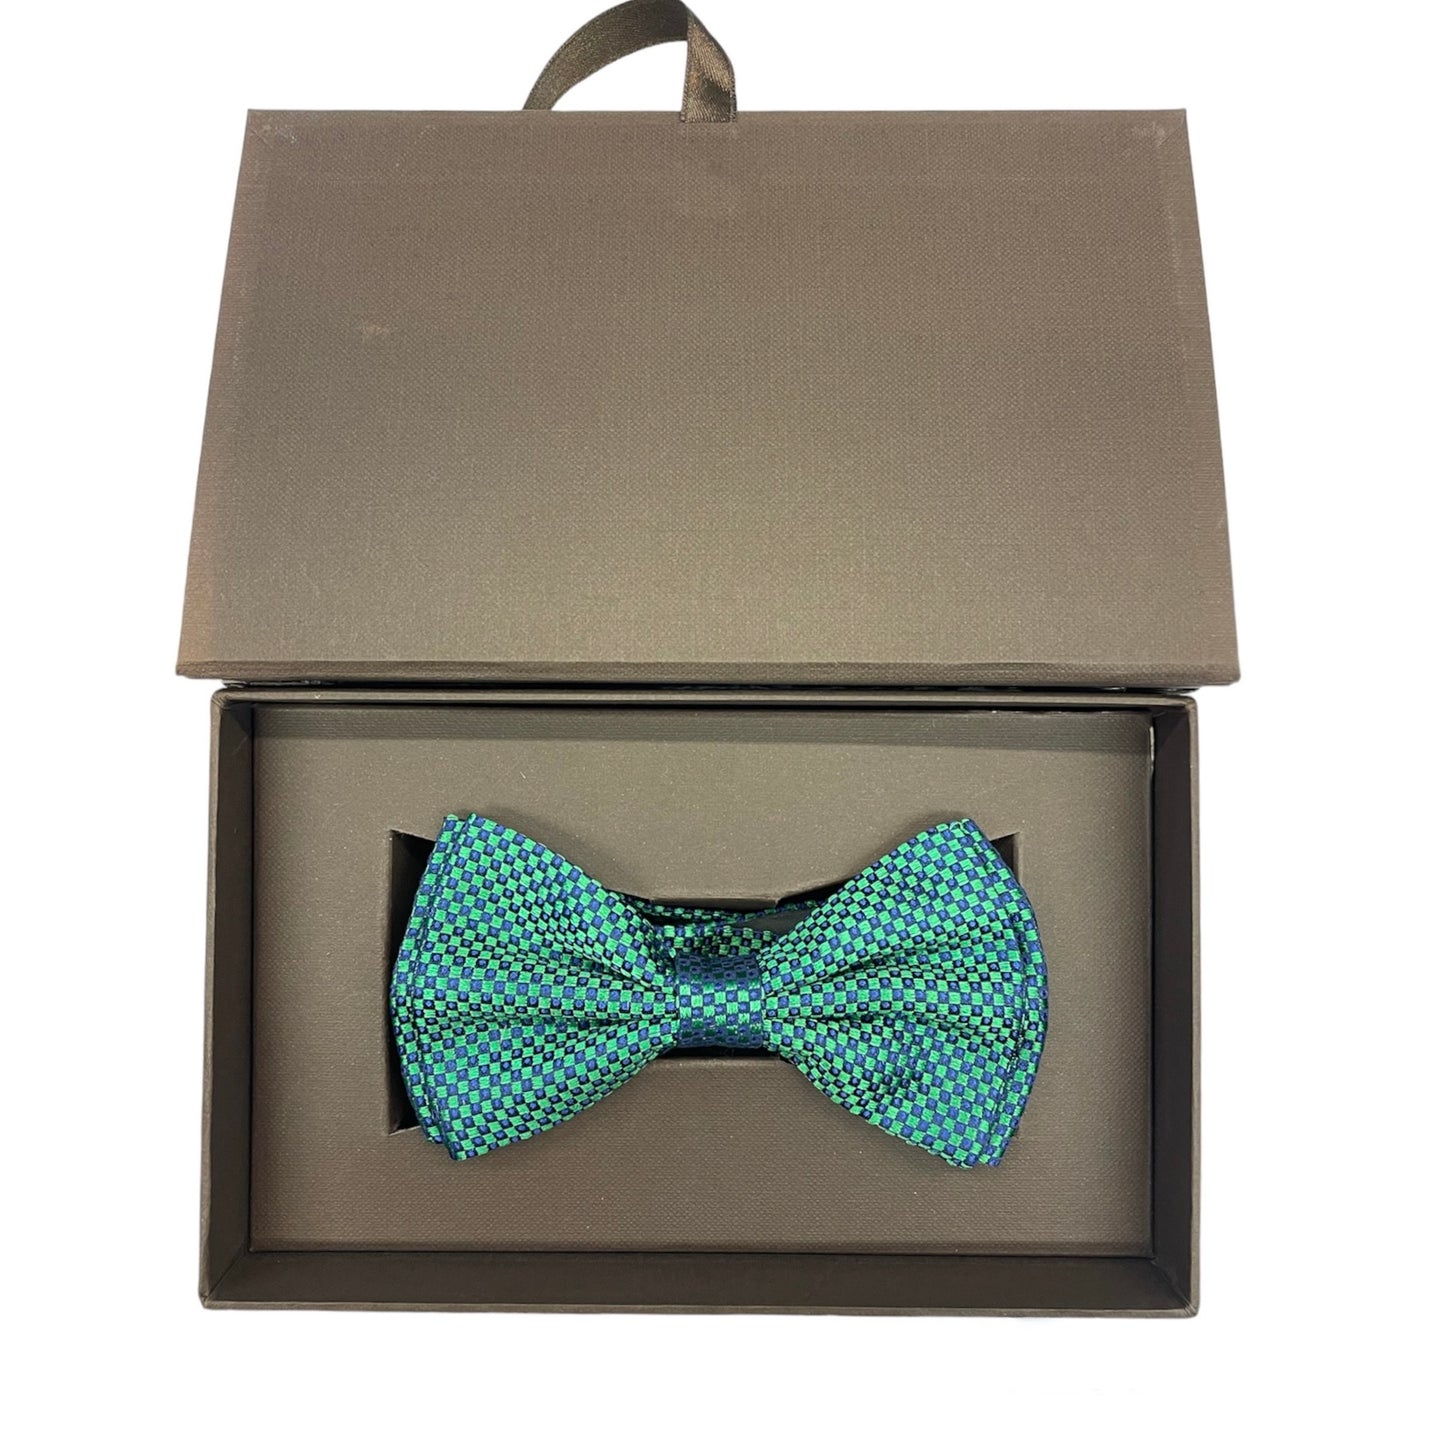 Sartorial bow tie in green chess patterned silk